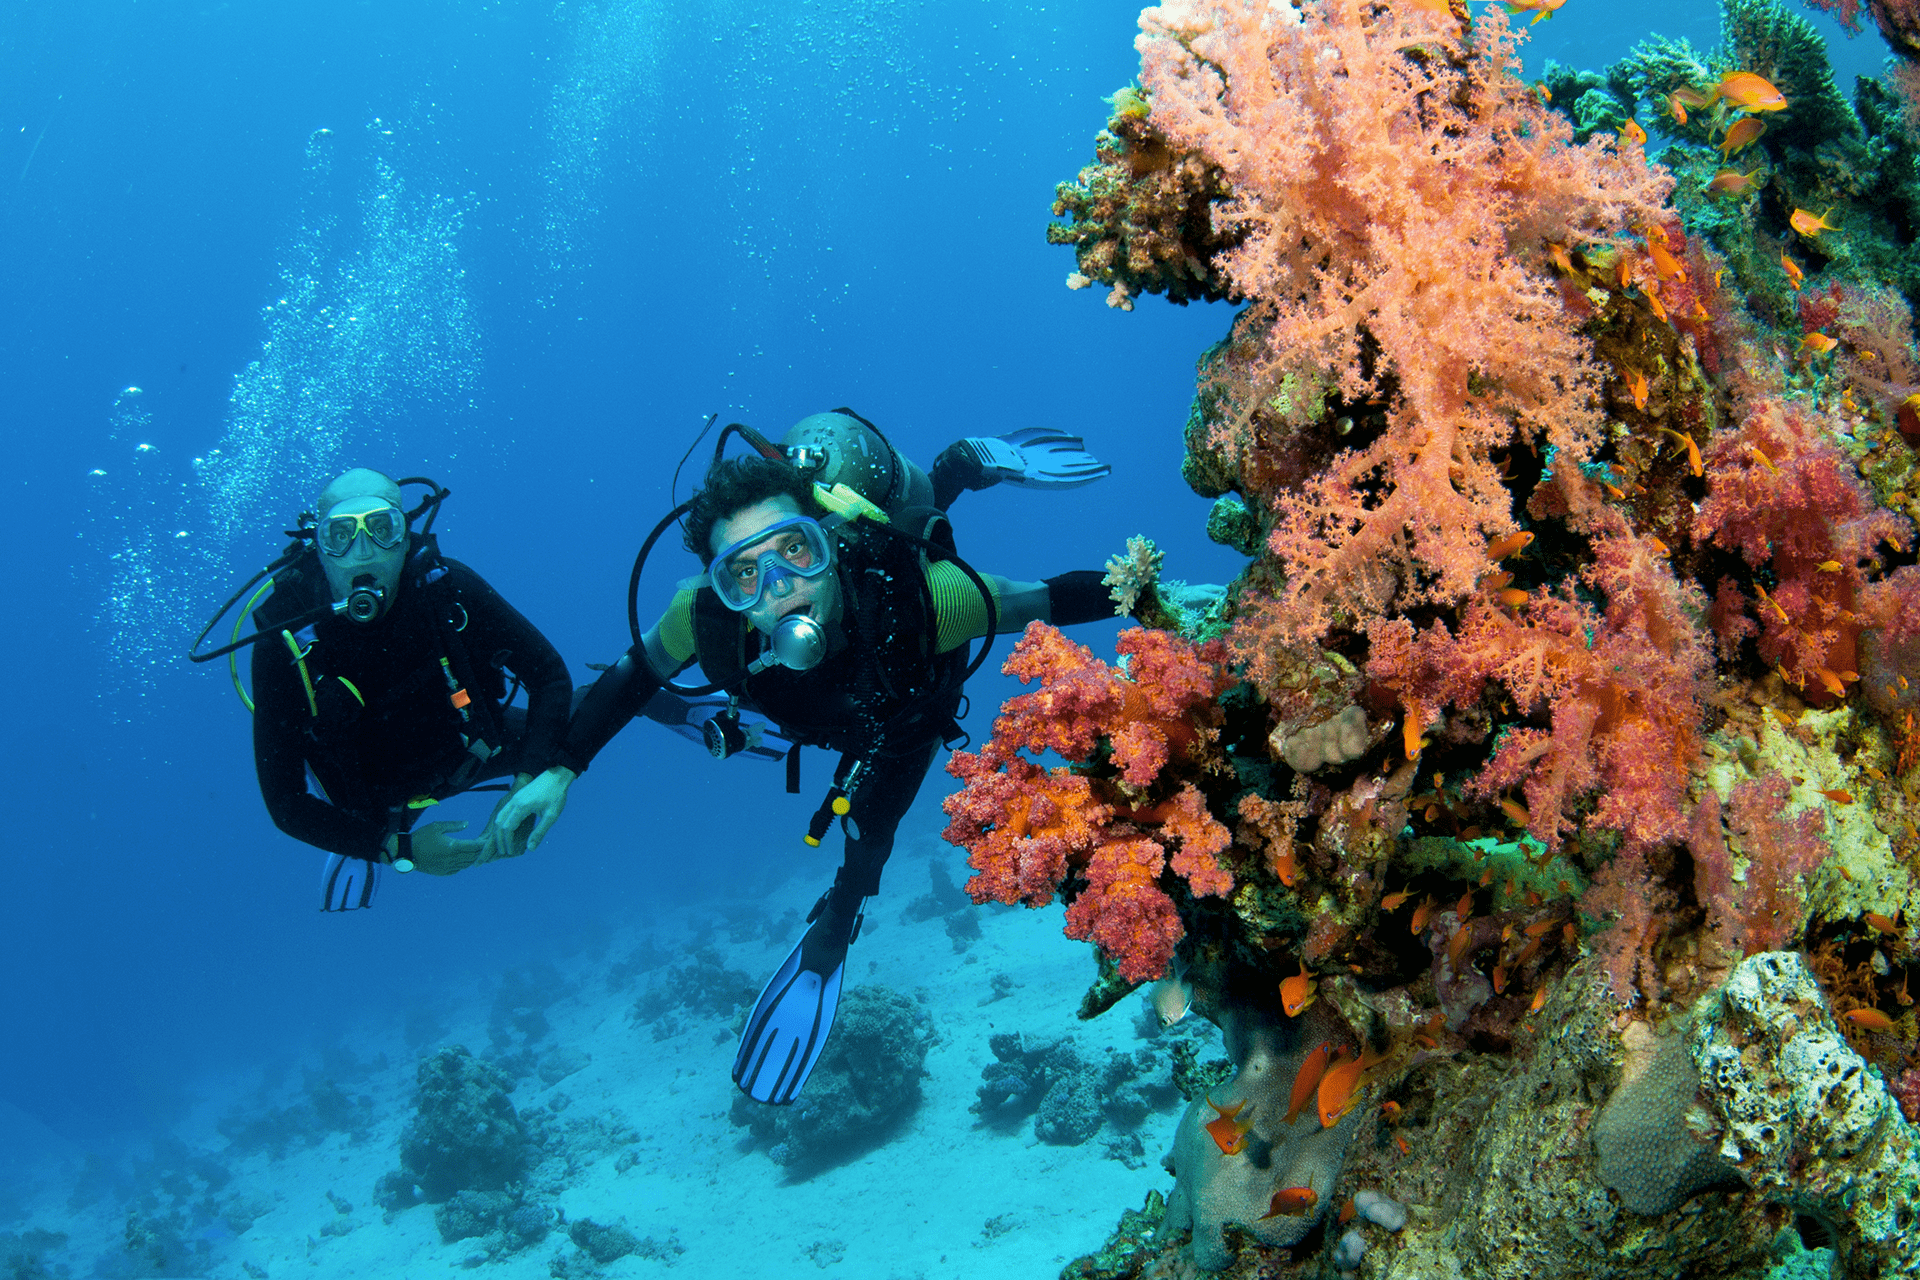 Ecotourism guidelines – Coral Reef